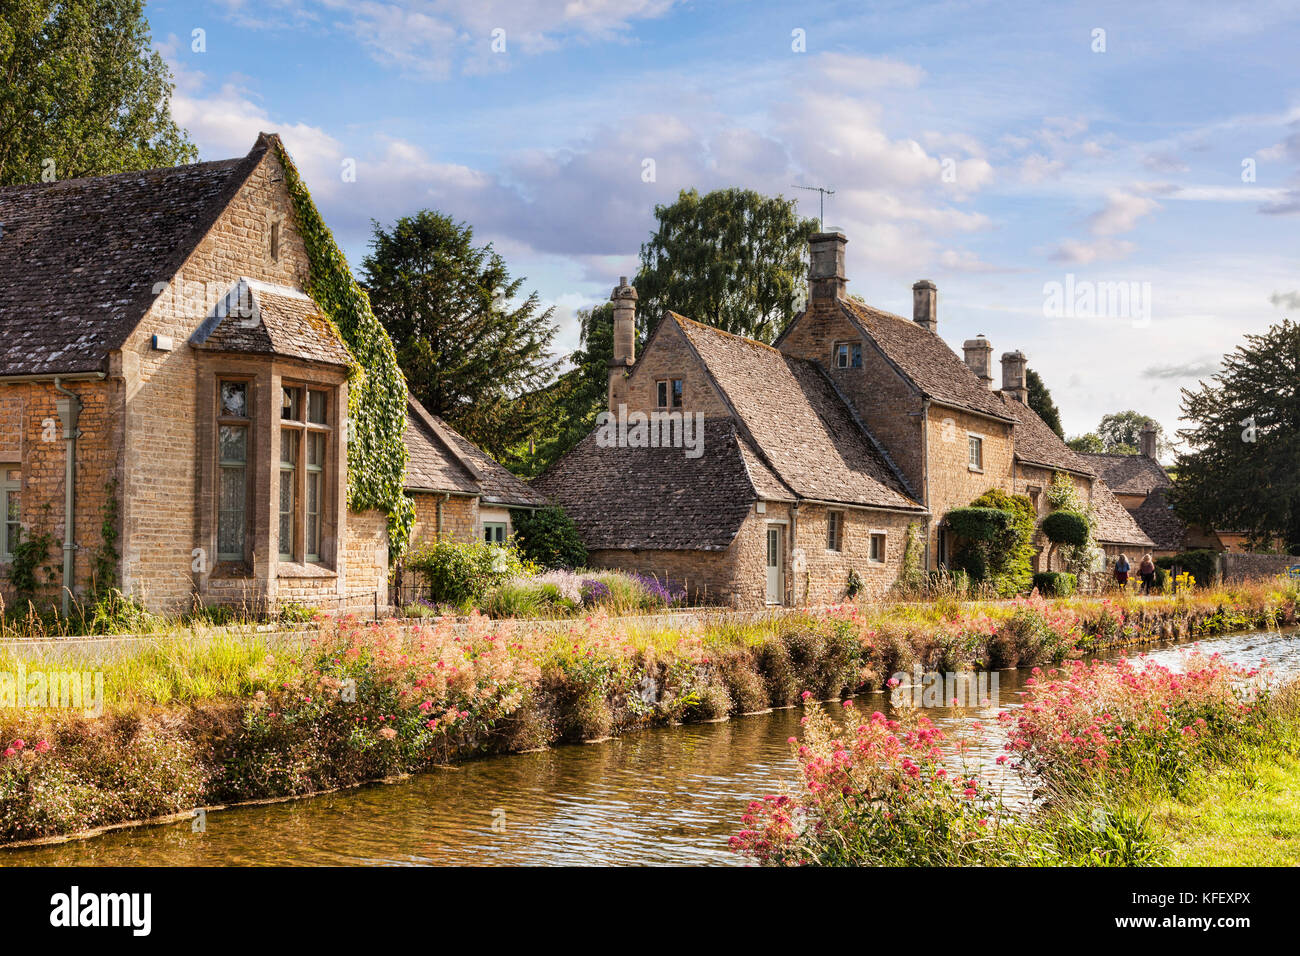 Die Cotswolds Dorf Lower Slaughter, Gloucestershire, England Stockfoto